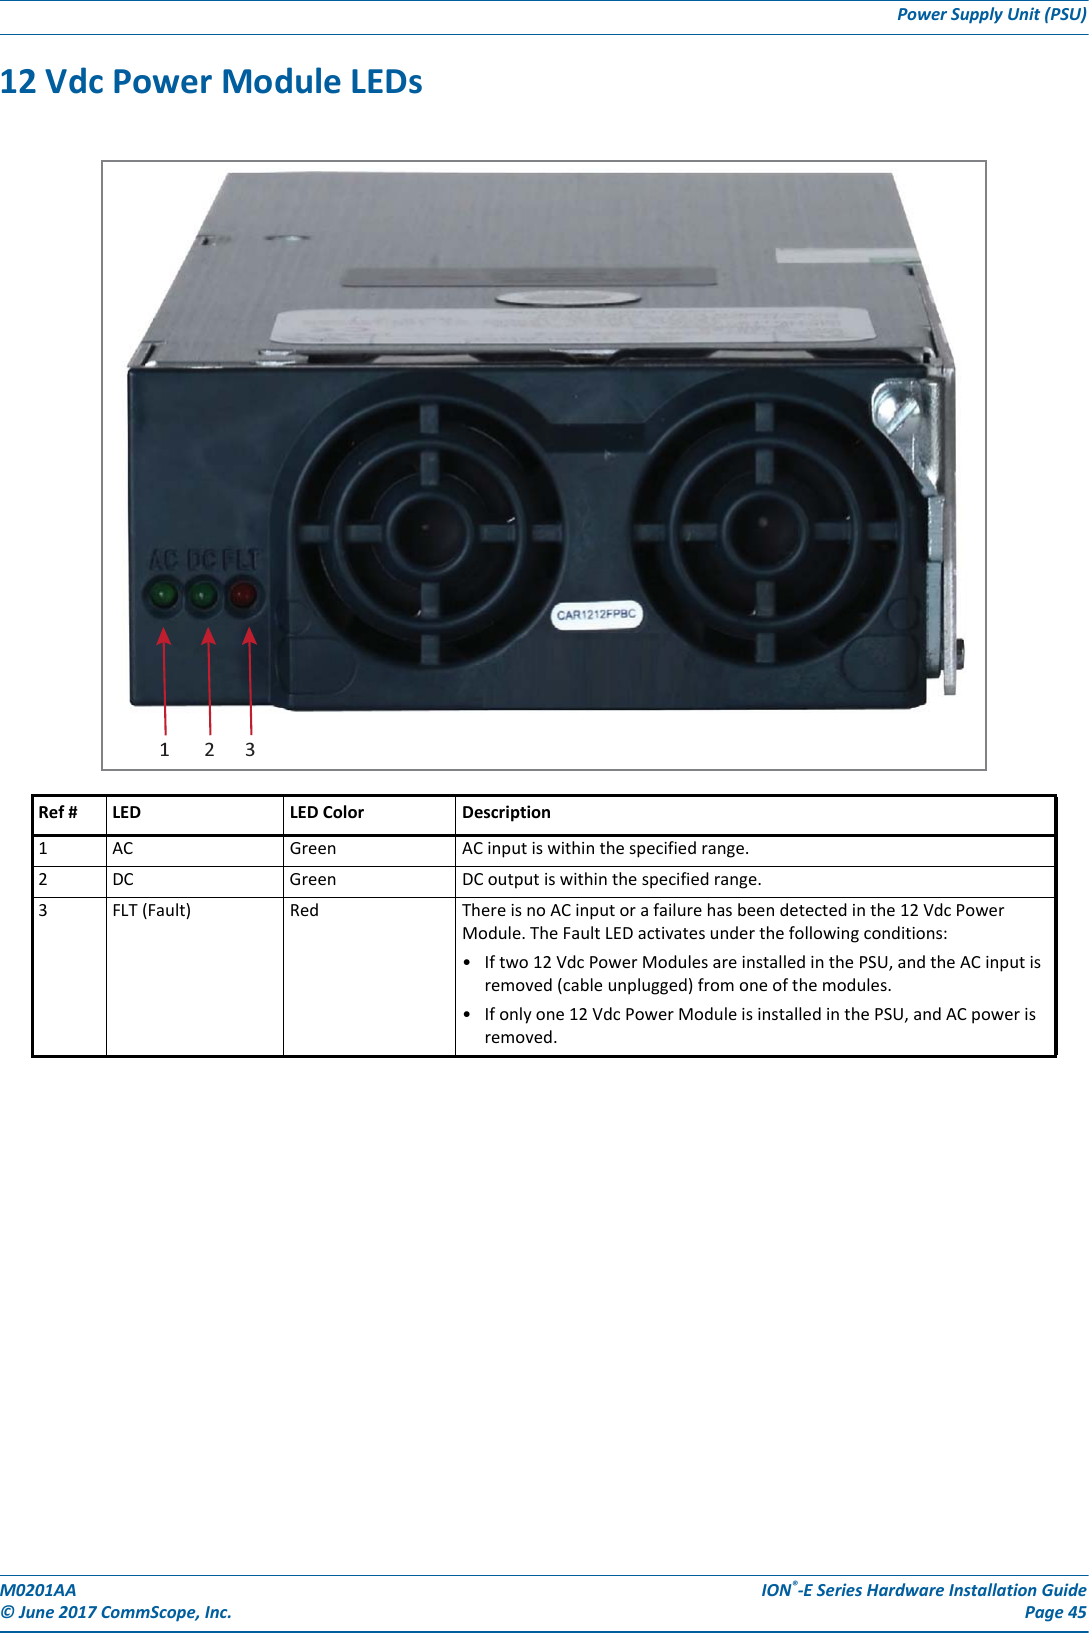 M0201AA ION®-E Series Hardware Installation Guide© June 2017 CommScope, Inc. Page 45Power Supply Unit (PSU)12 Vdc Power Module LEDs Ref # LED LED Color Description1 AC Green AC input is within the specified range.2 DC Green DC output is within the specified range.3 FLT (Fault) Red There is no AC input or a failure has been detected in the 12 Vdc Power Module. The Fault LED activates under the following conditions:• If two 12 Vdc Power Modules are installed in the PSU, and the AC input is removed (cable unplugged) from one of the modules. • If only one 12 Vdc Power Module is installed in the PSU, and AC power is removed.123